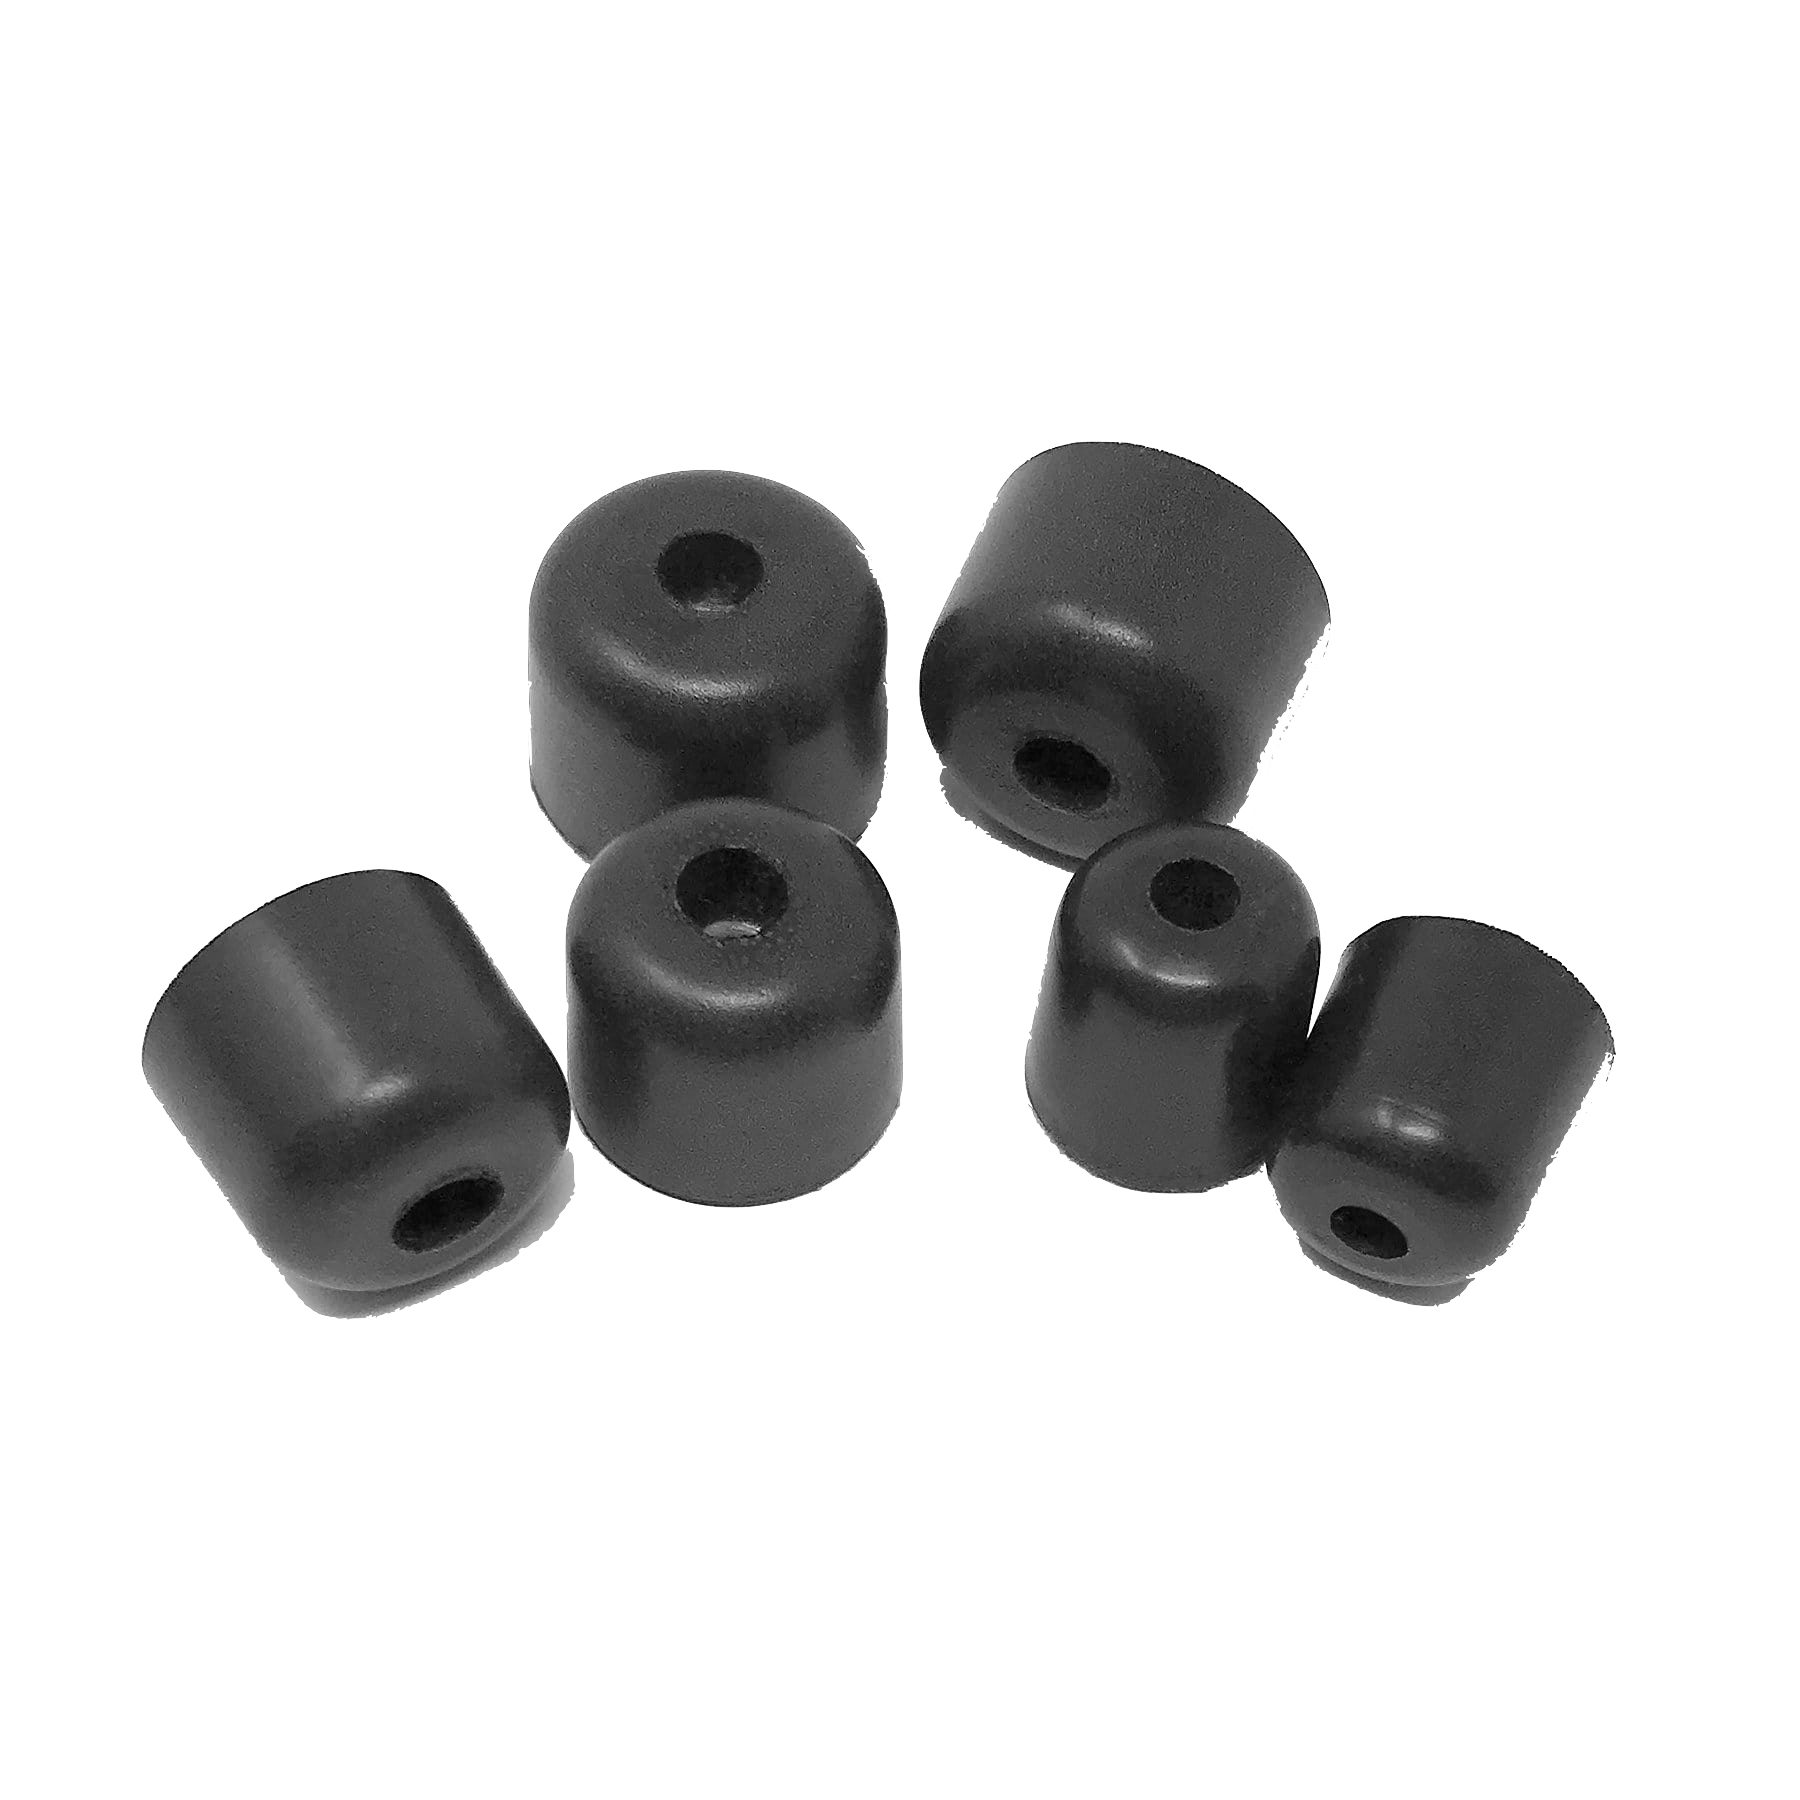 Short TRILOGY™ Foam Replacement Eartips for ISOtunes FREE (5 Pair Pack) - EU ISOtunes